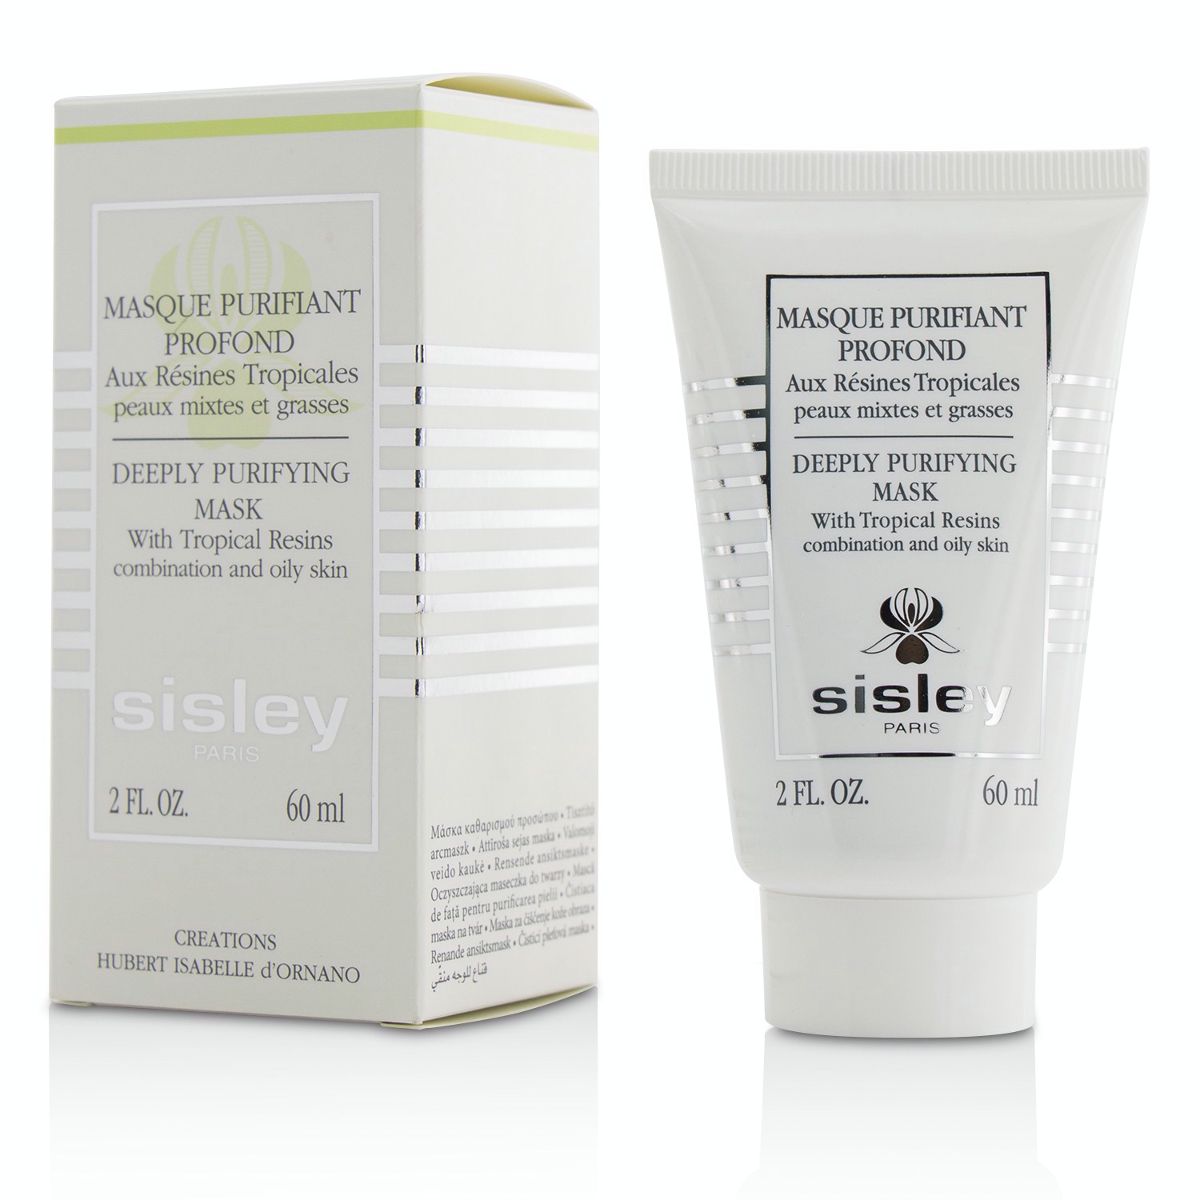 Deeply Purifying Mask With Tropical Resins (Combination And Oily Skin) Sisley Image